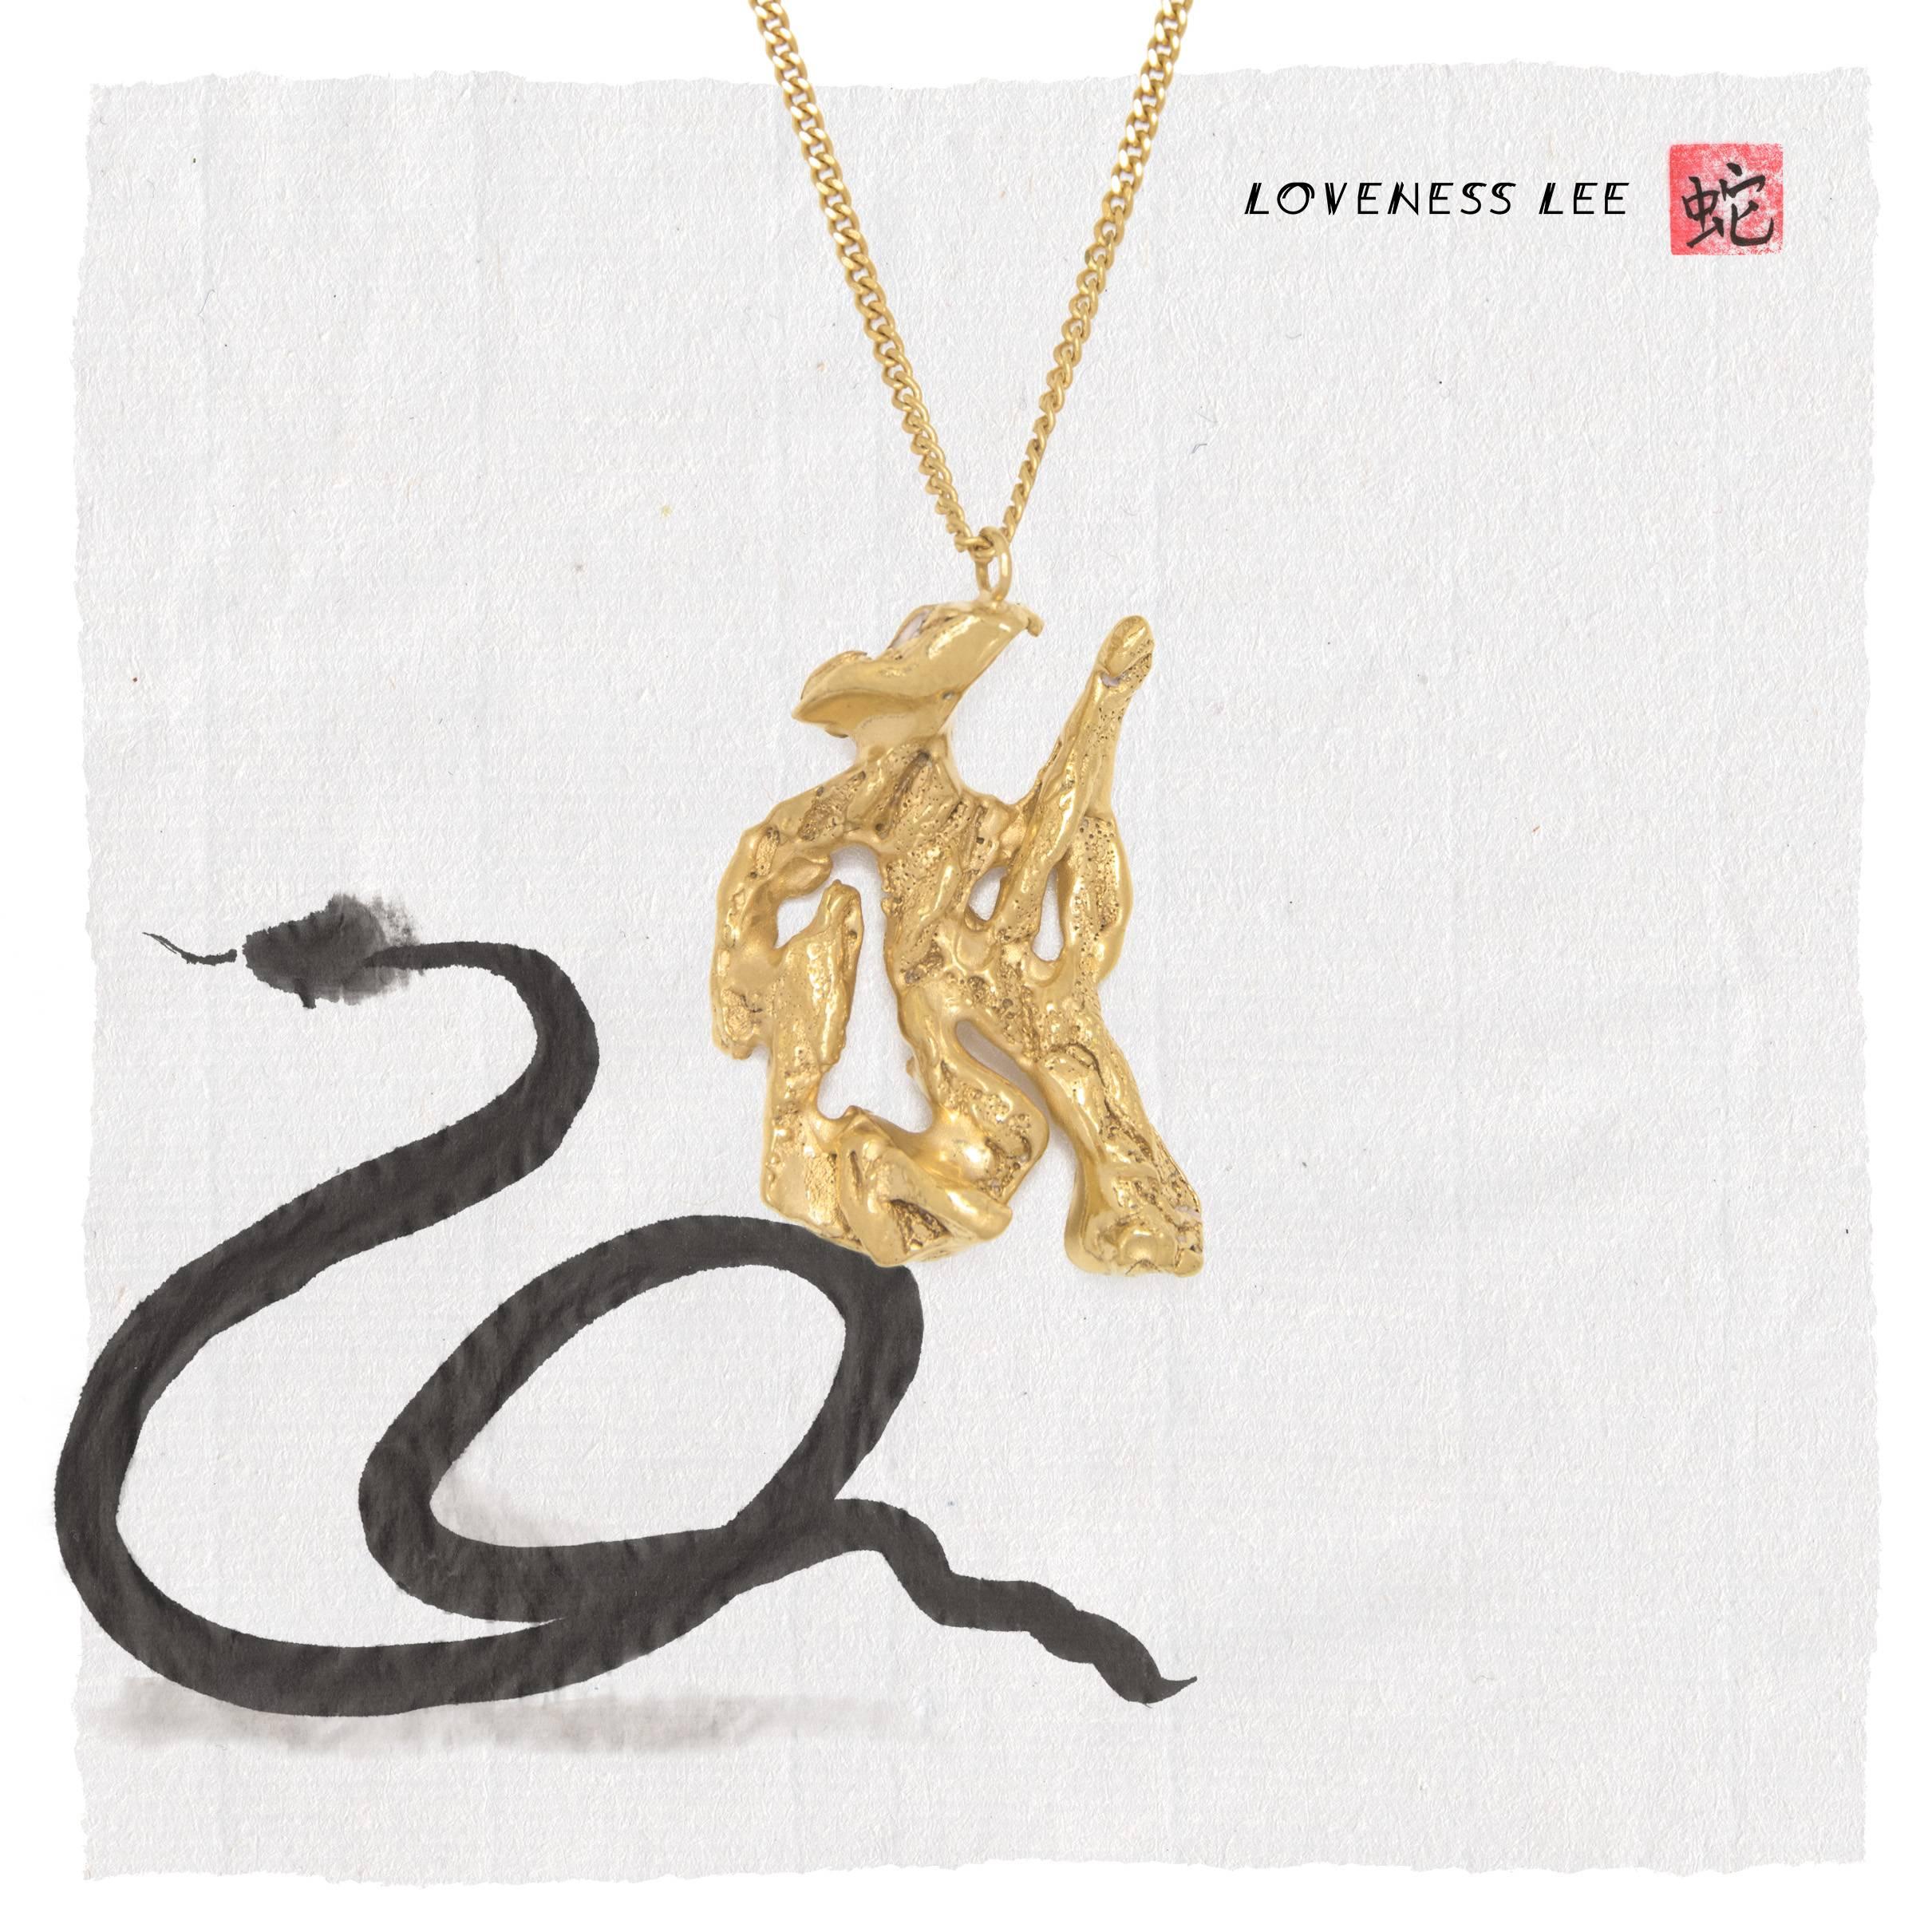 Women's Loveness Lee - Chinese Zodiac Snake - Horoscope Gold Pendant Necklace For Sale